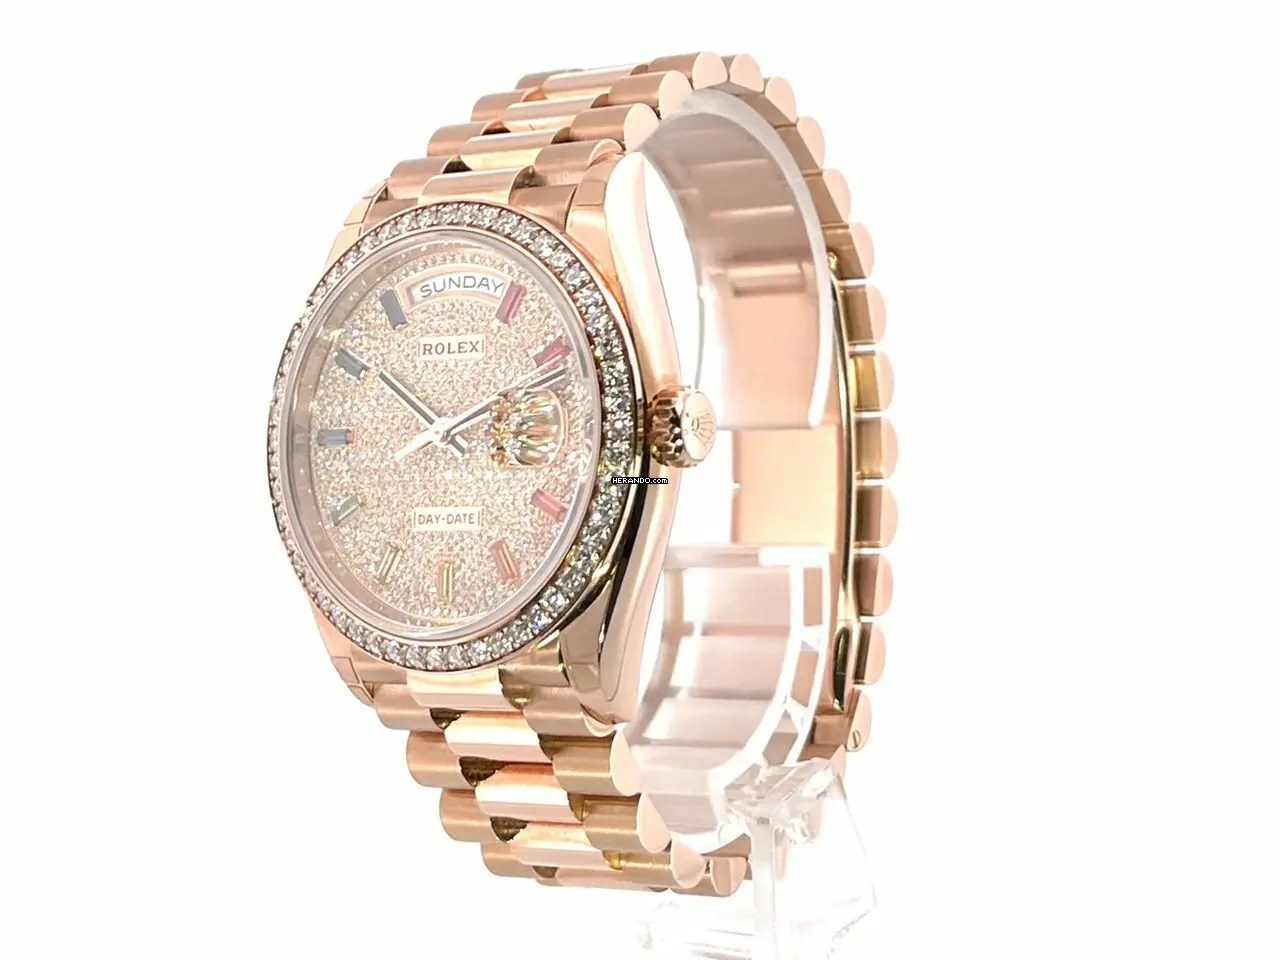 watches-328769-28453511-wif1h3548whcl5b77vl4hyzn-ExtraLarge.webp